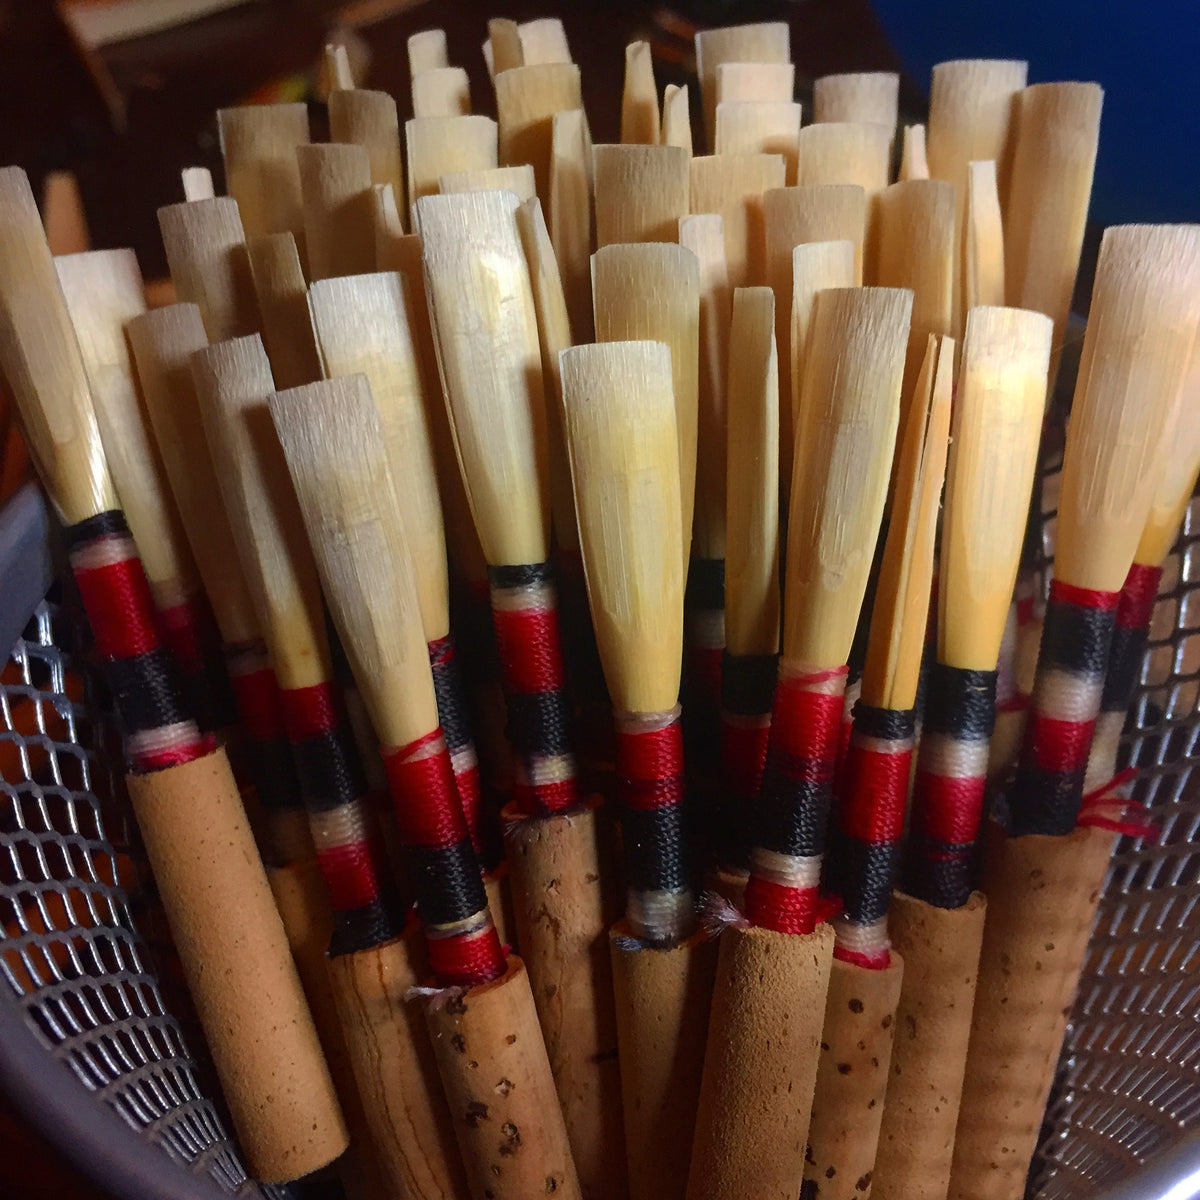 Double reeds. Oboe, English horn, oboe d'amore and bassoon reeds.